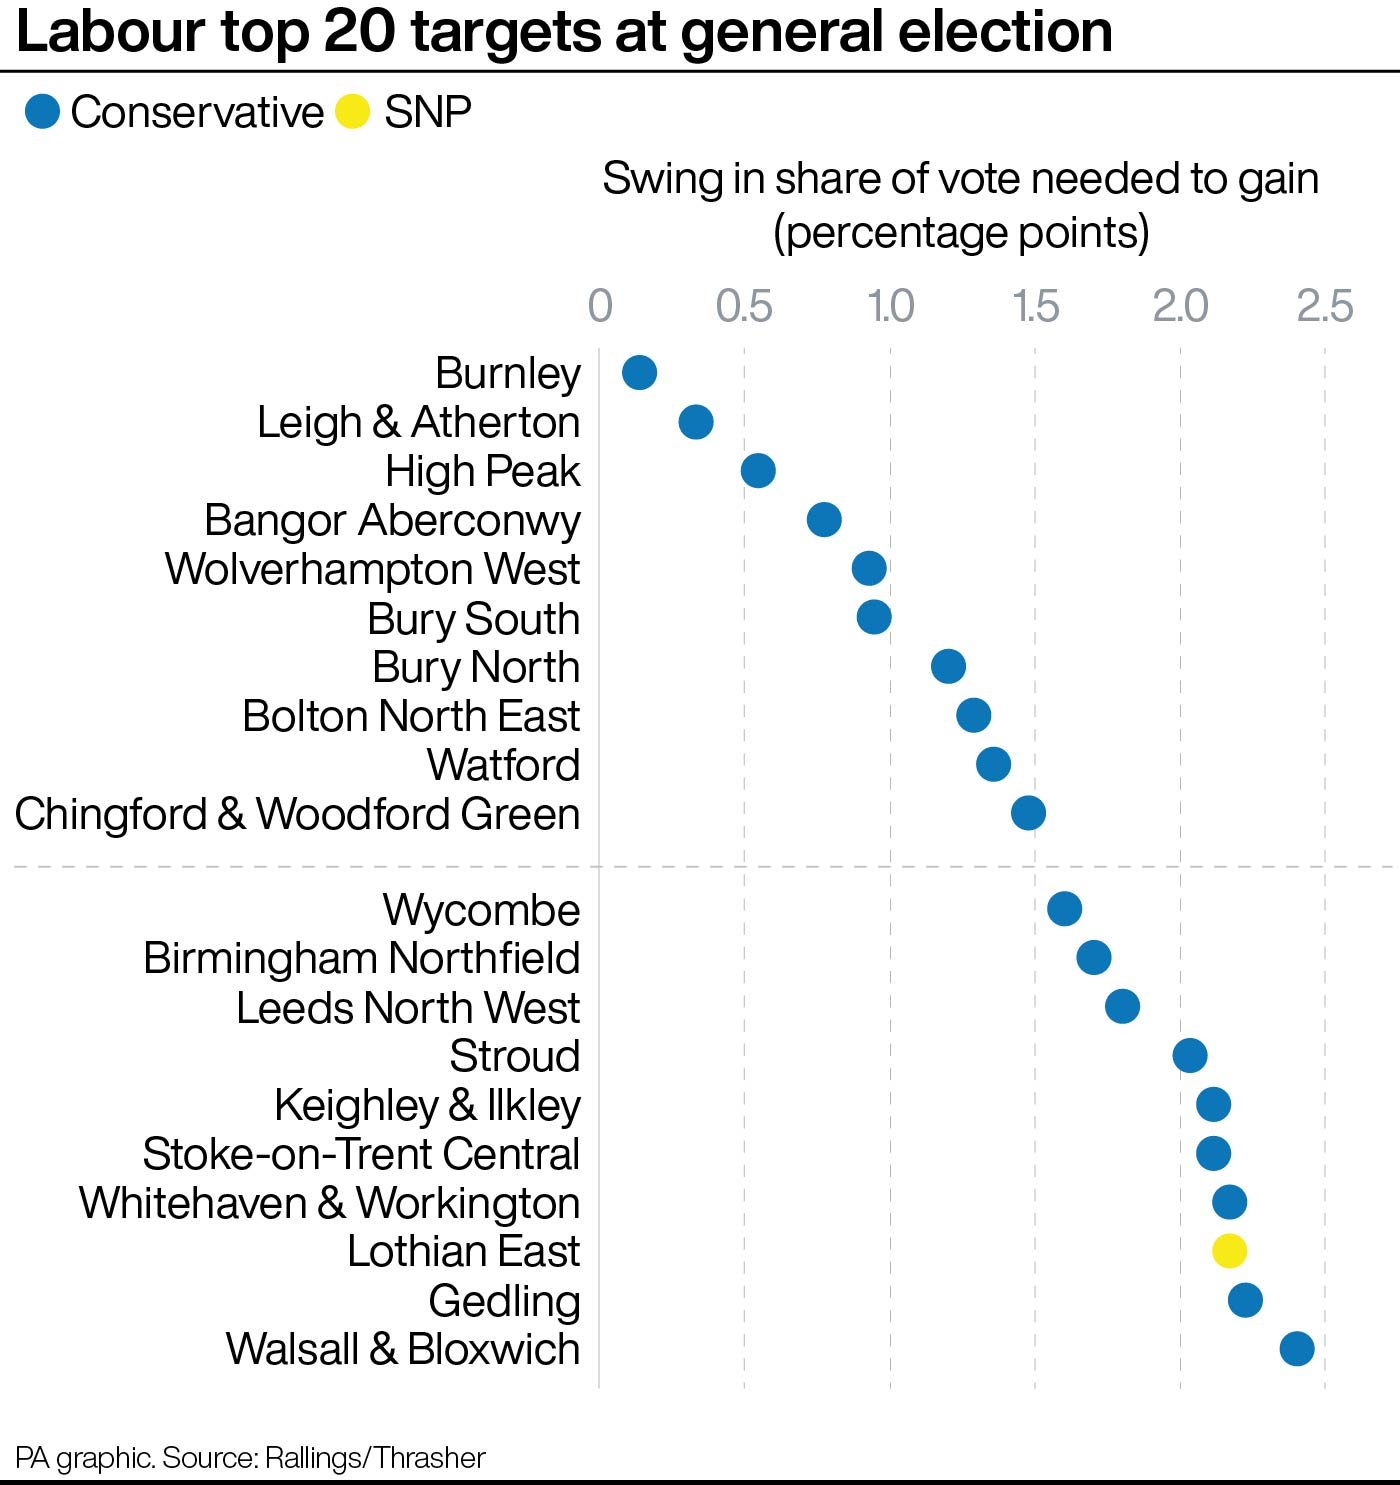 Where the election will be won and lost: Key targets and battlegrounds